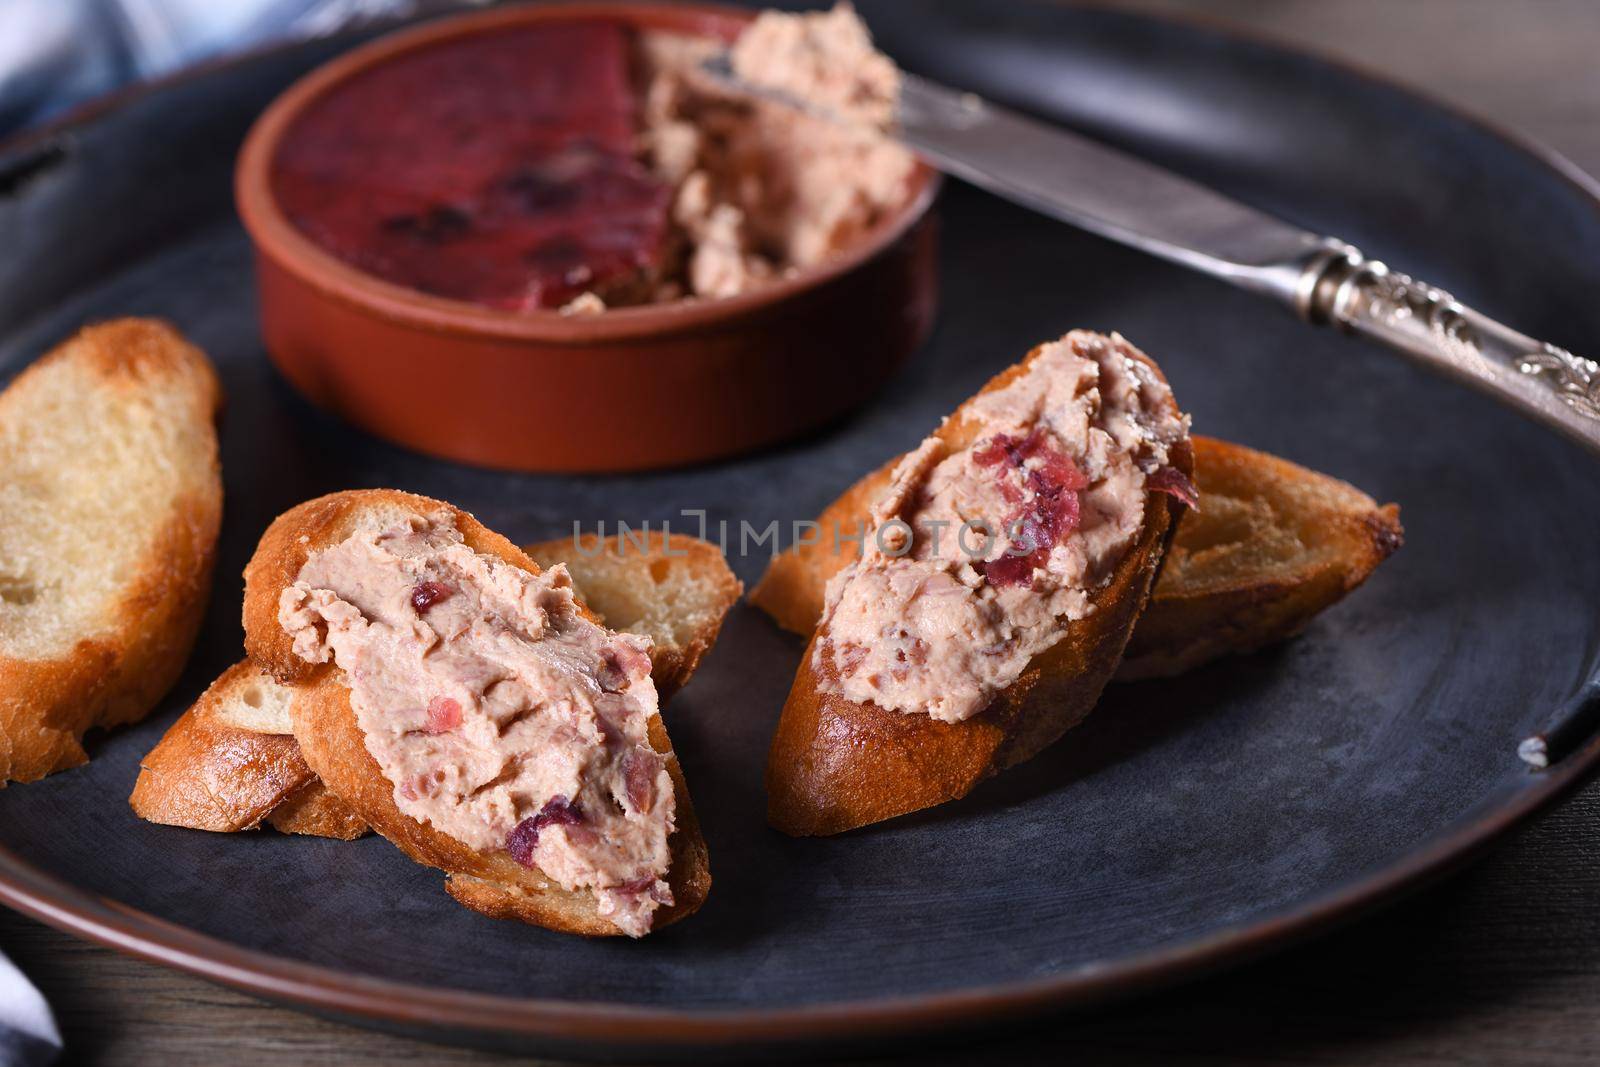 Delicate chicken pate with mashed cranberries spread on toasted baguette slices. Country style food.